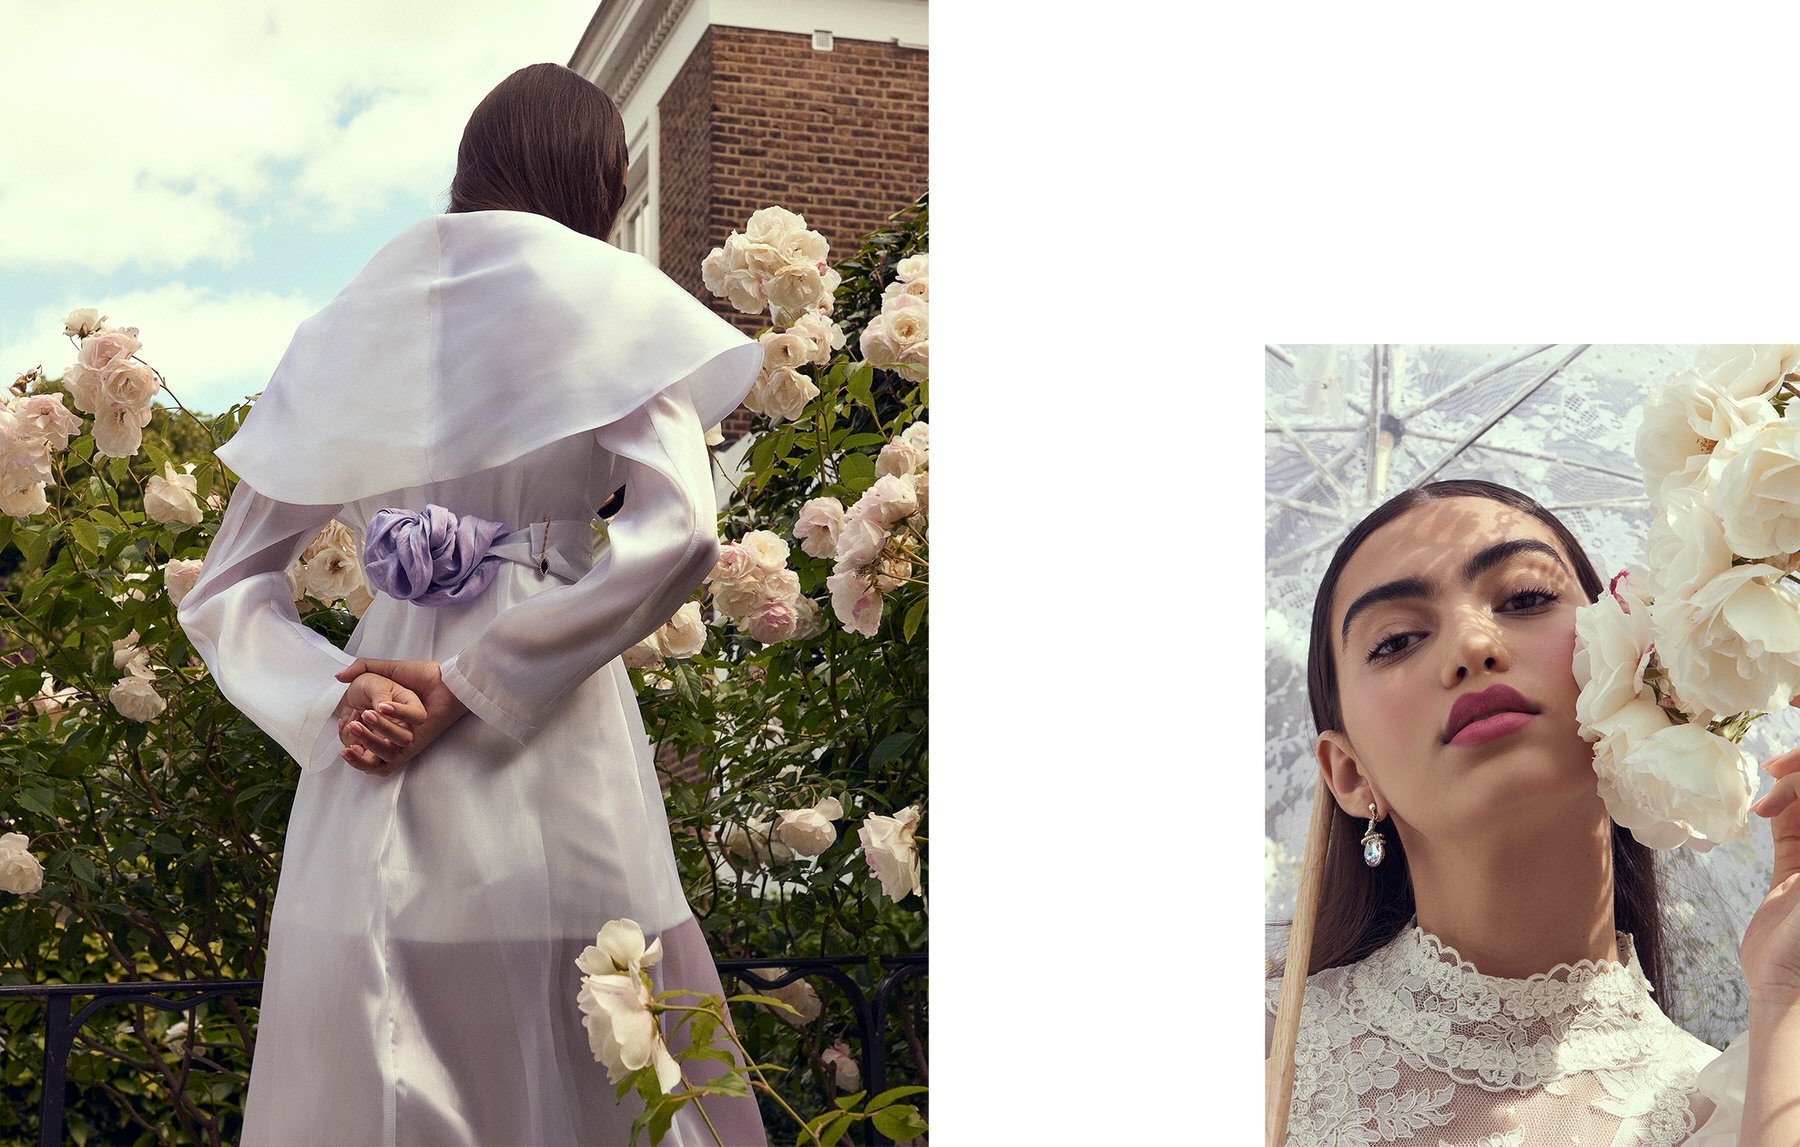  Sabrina dances through the West London streets with falling spring blossoms for Harpers Bazaar,     